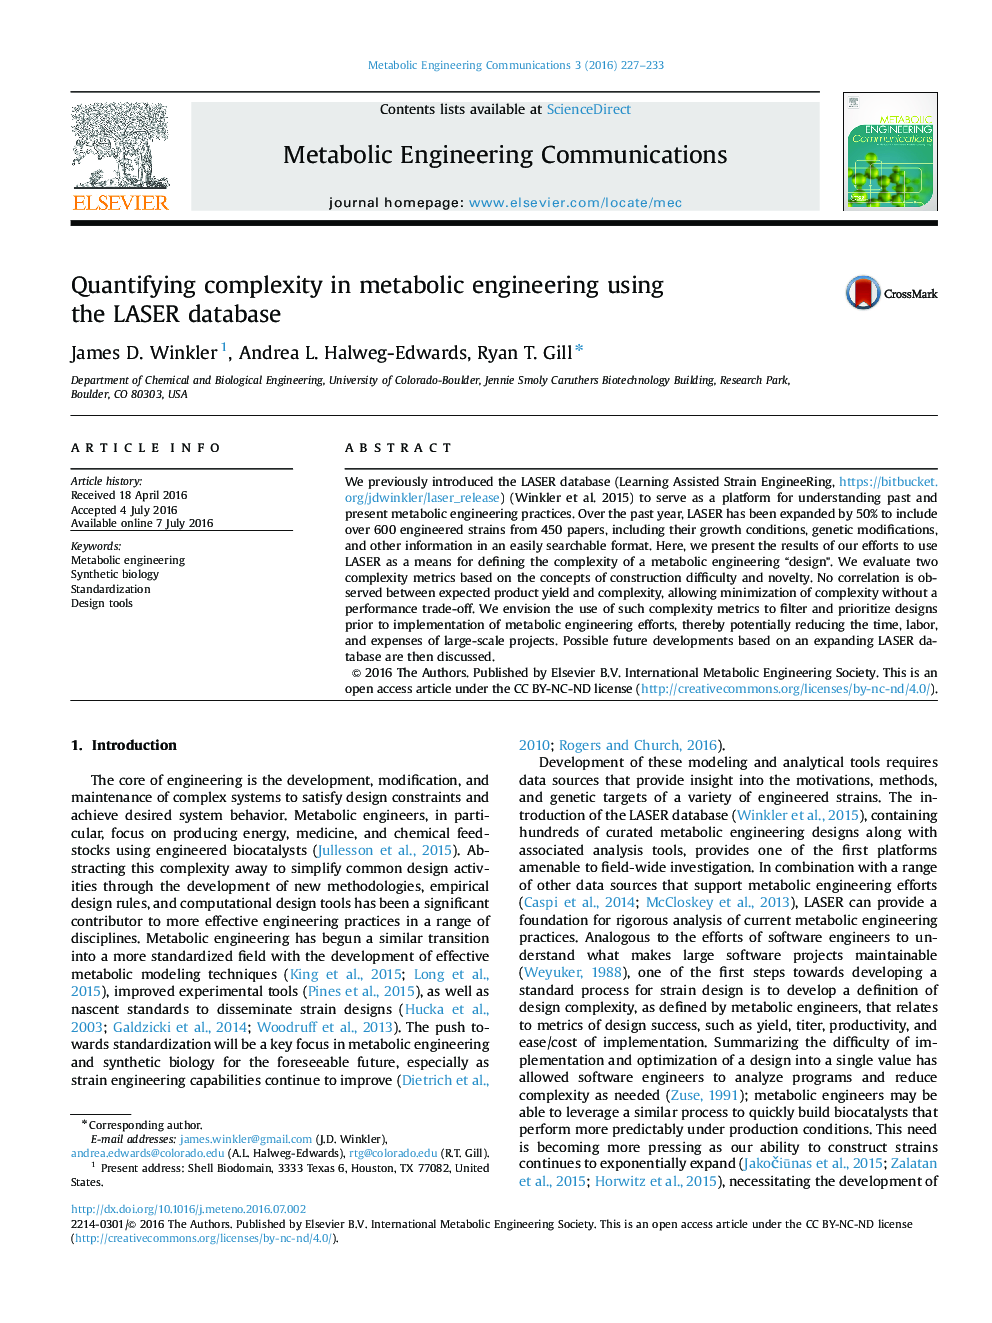 Quantifying complexity in metabolic engineering using the LASER database